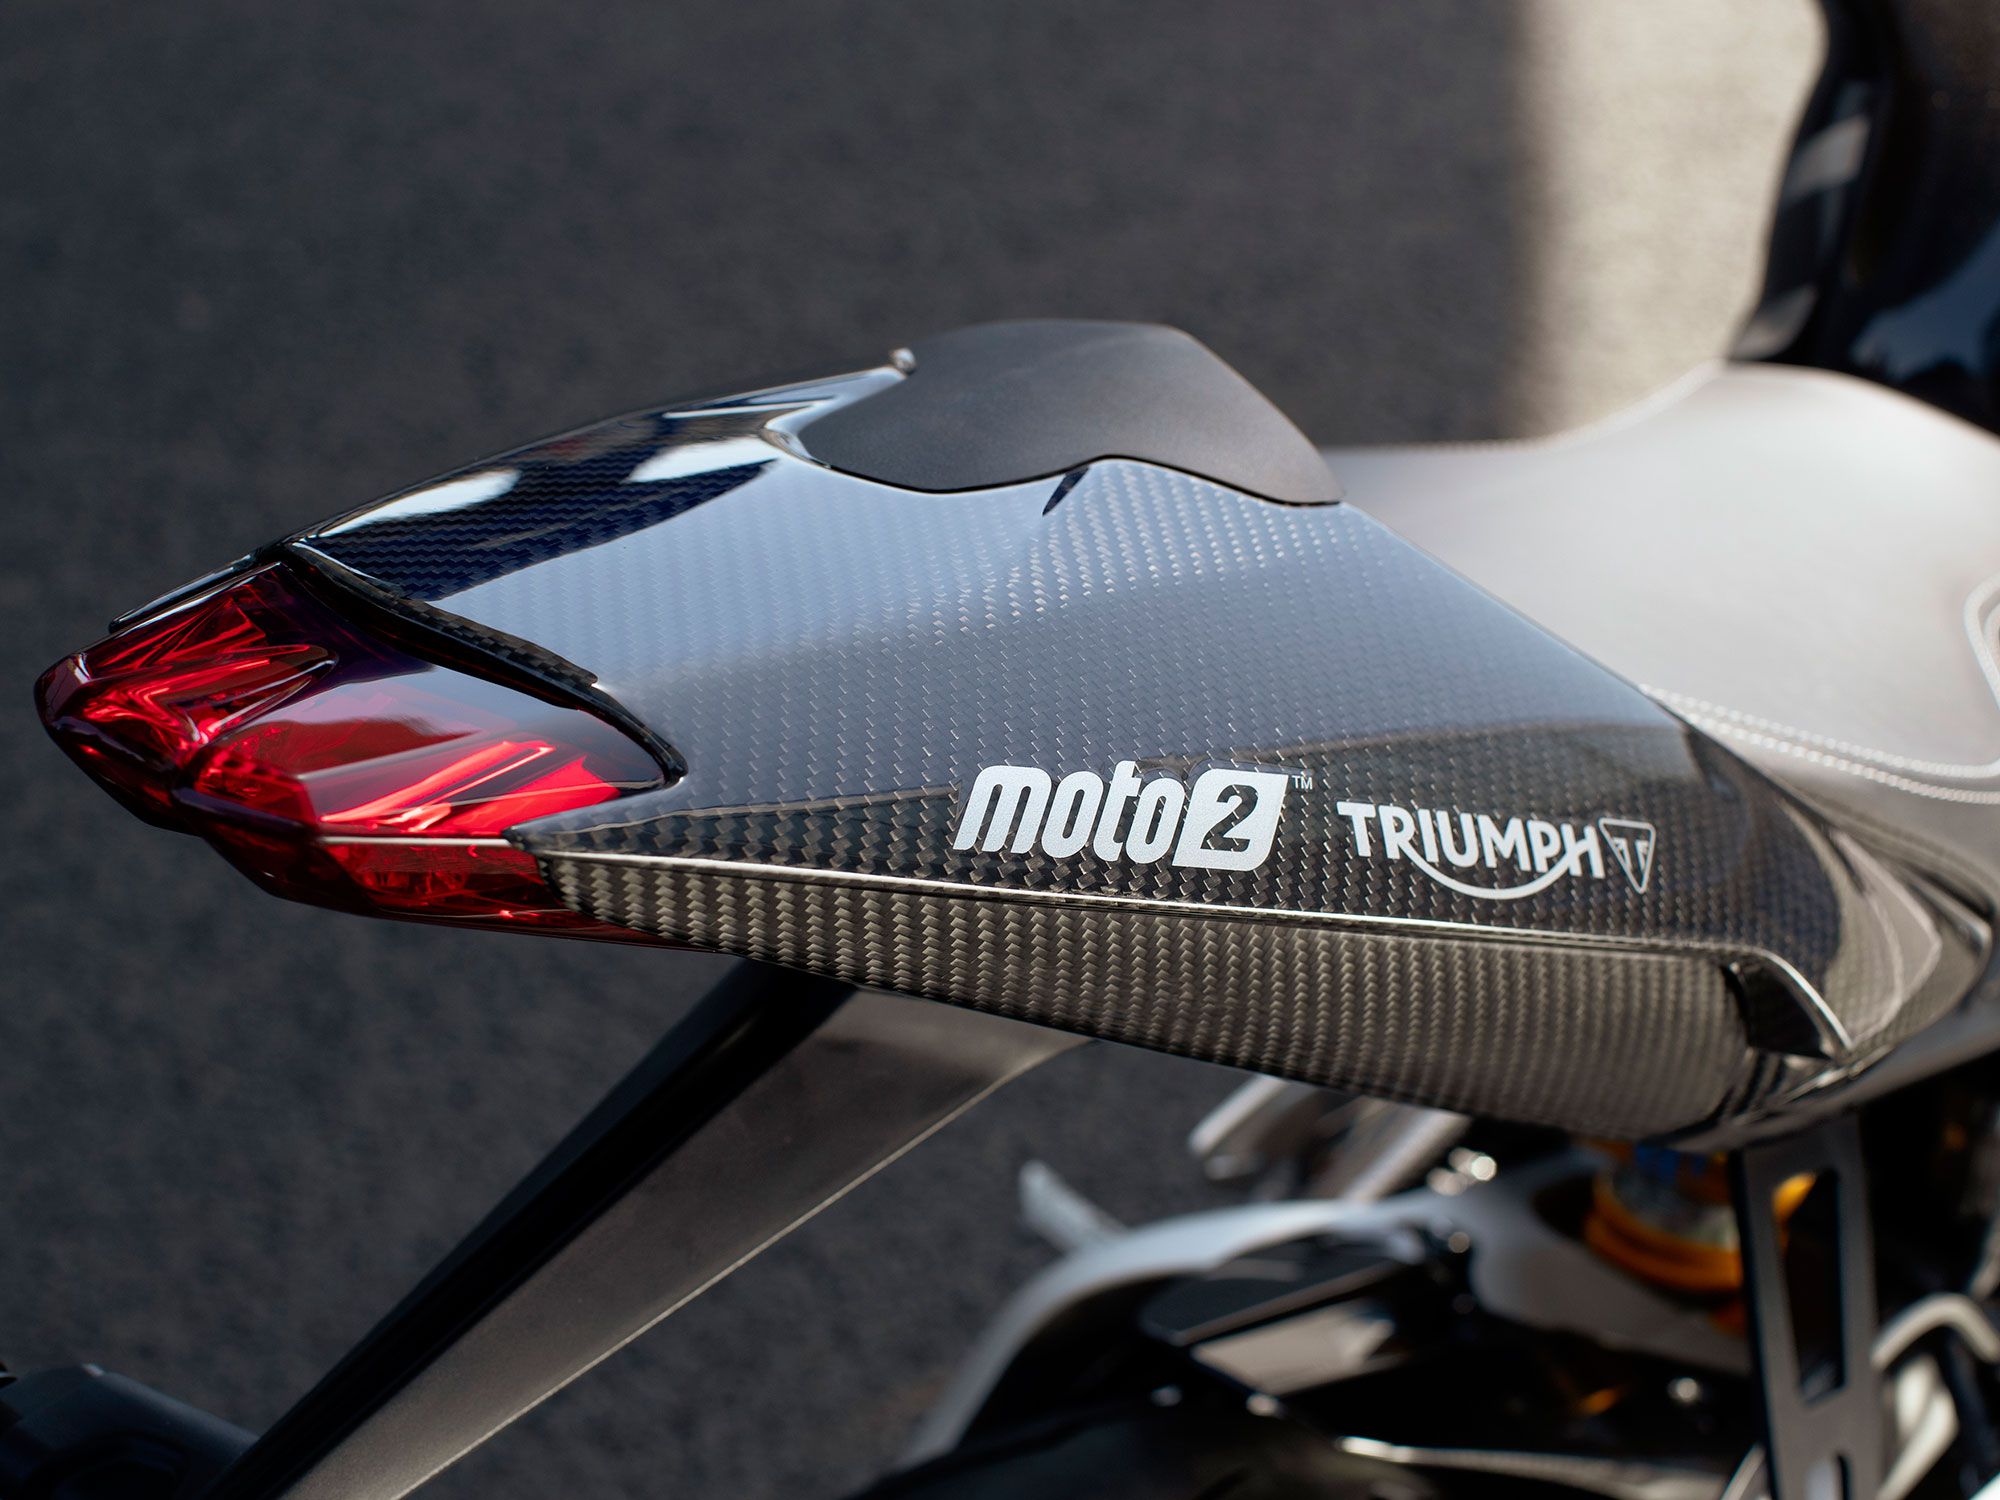 This Triumph Moto2 replica benefits from full carbon fiber body work that not only looks awesome but reduces its curb weight to around 410-pounds with fuel.